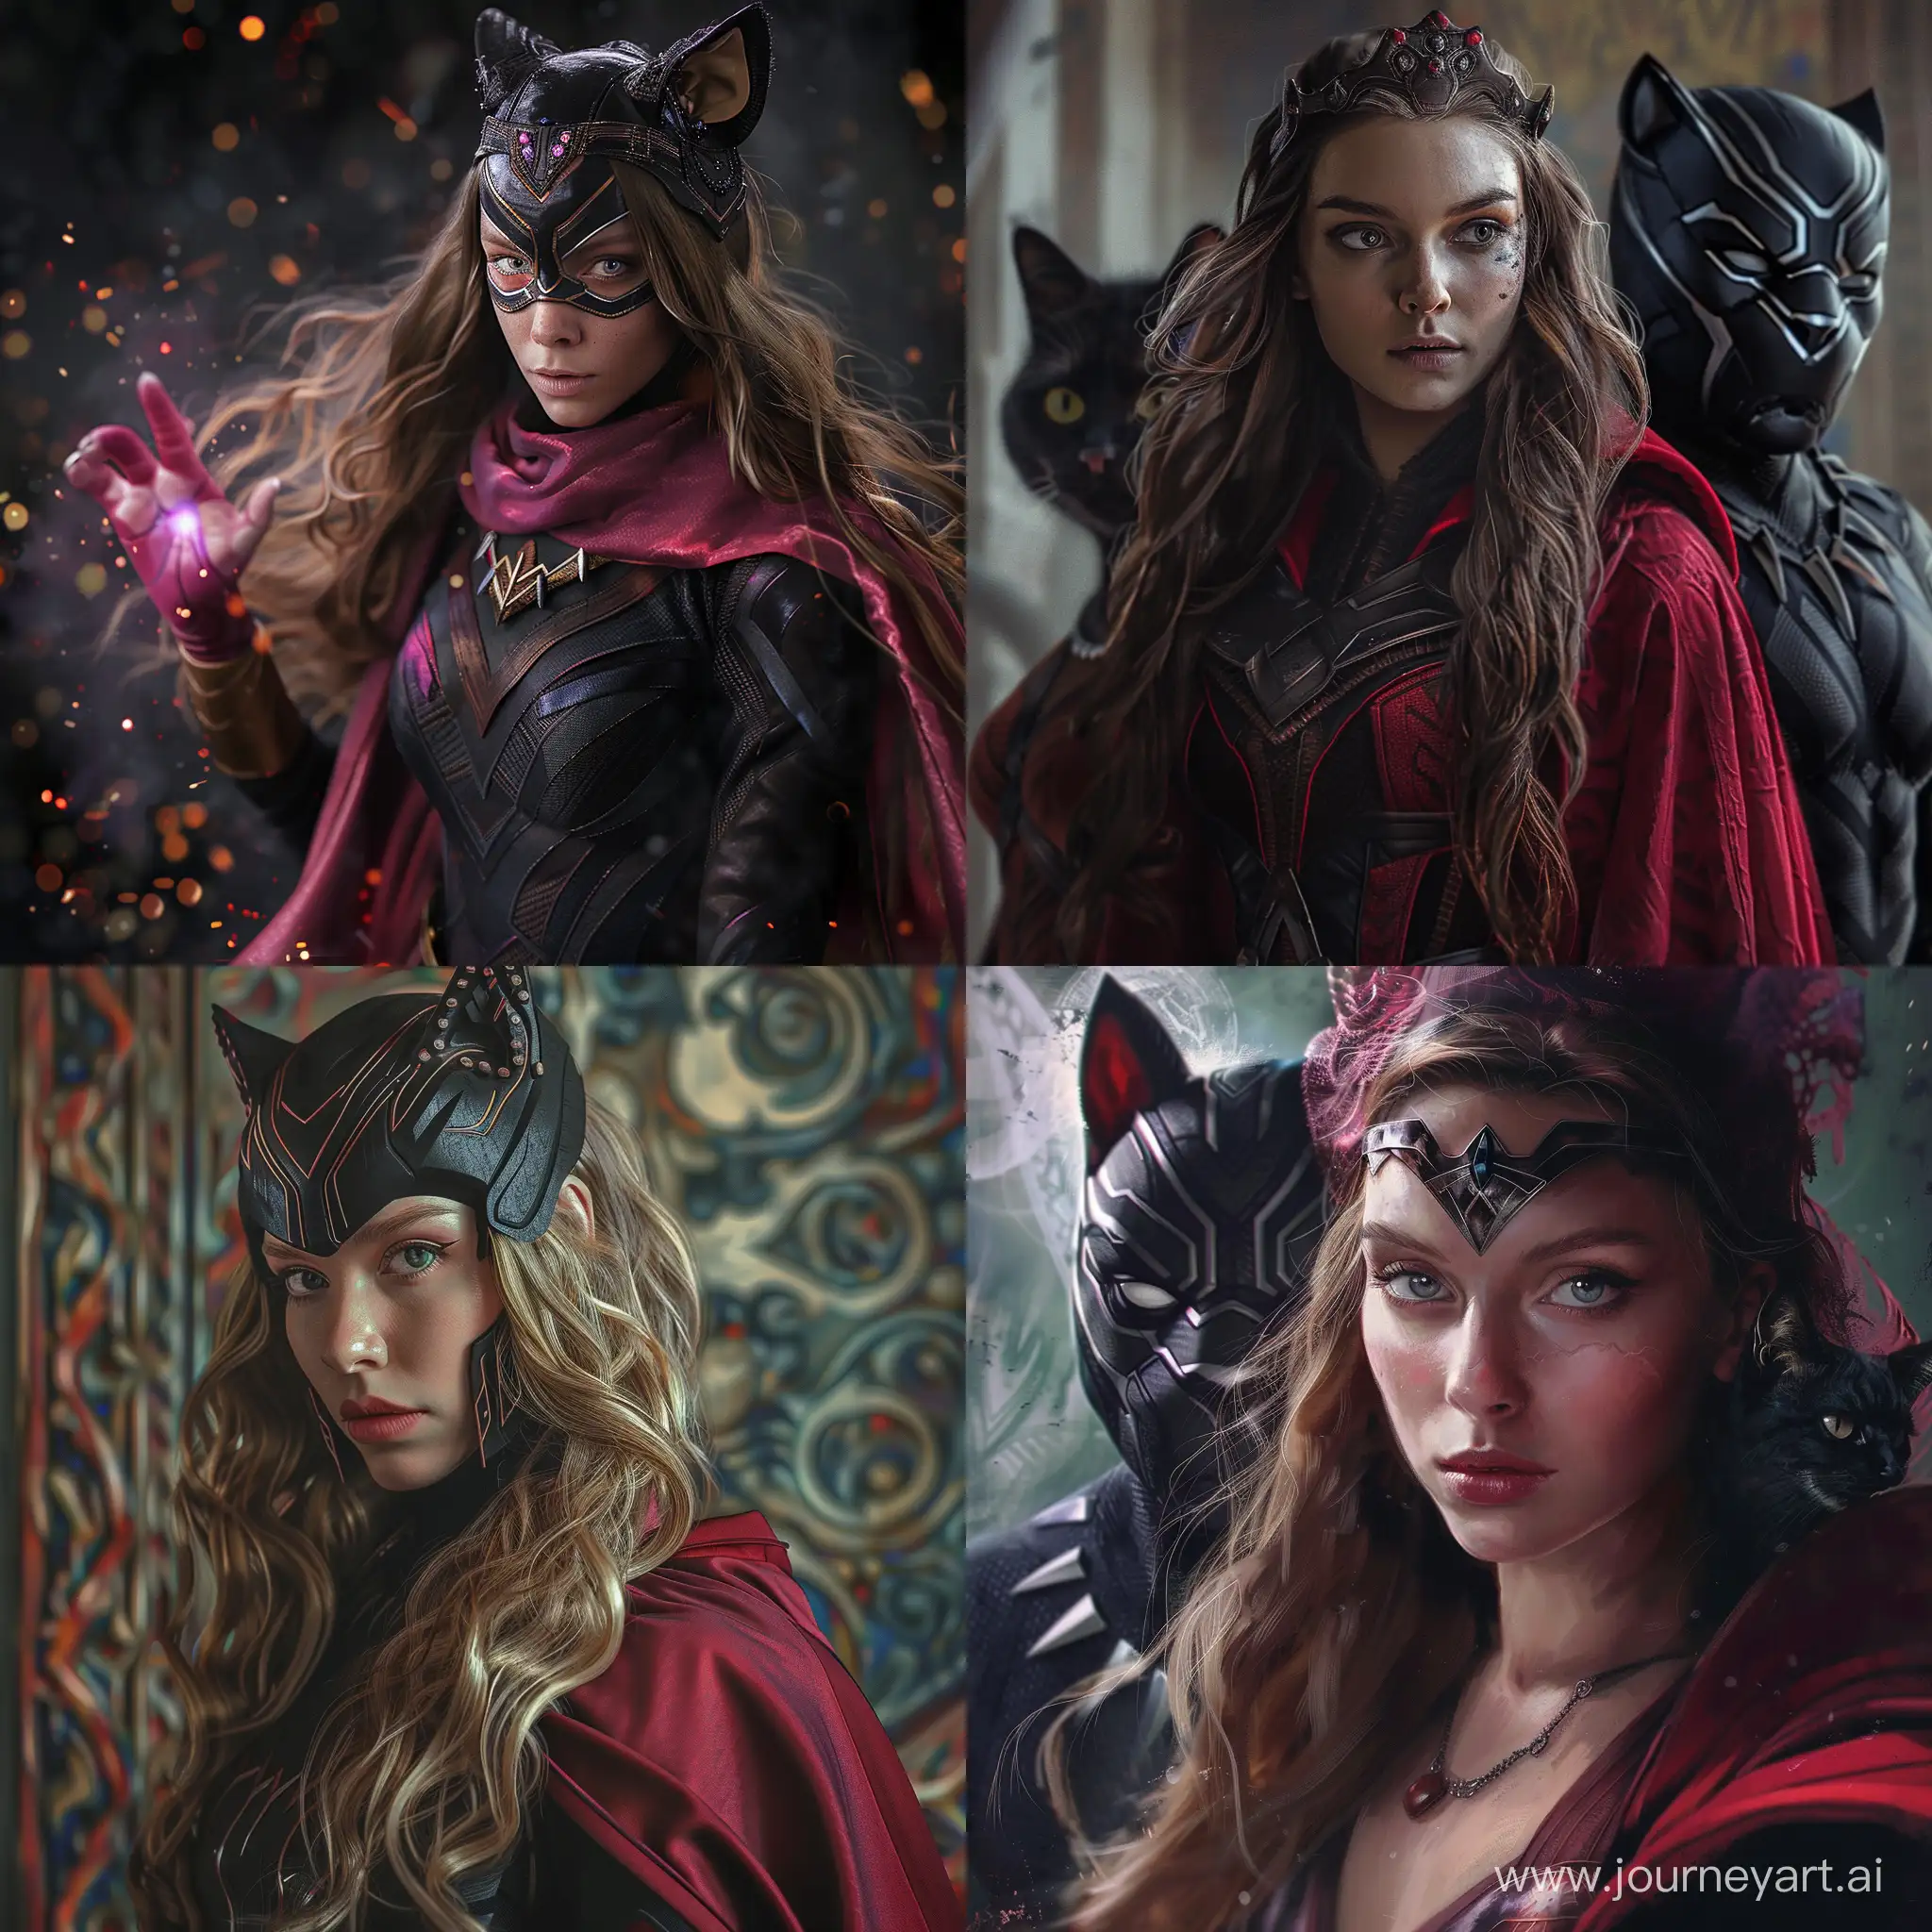 Hyperrealistic-Scarlet-Witch-Black-Panther-and-Catwoman-Fusion-Art